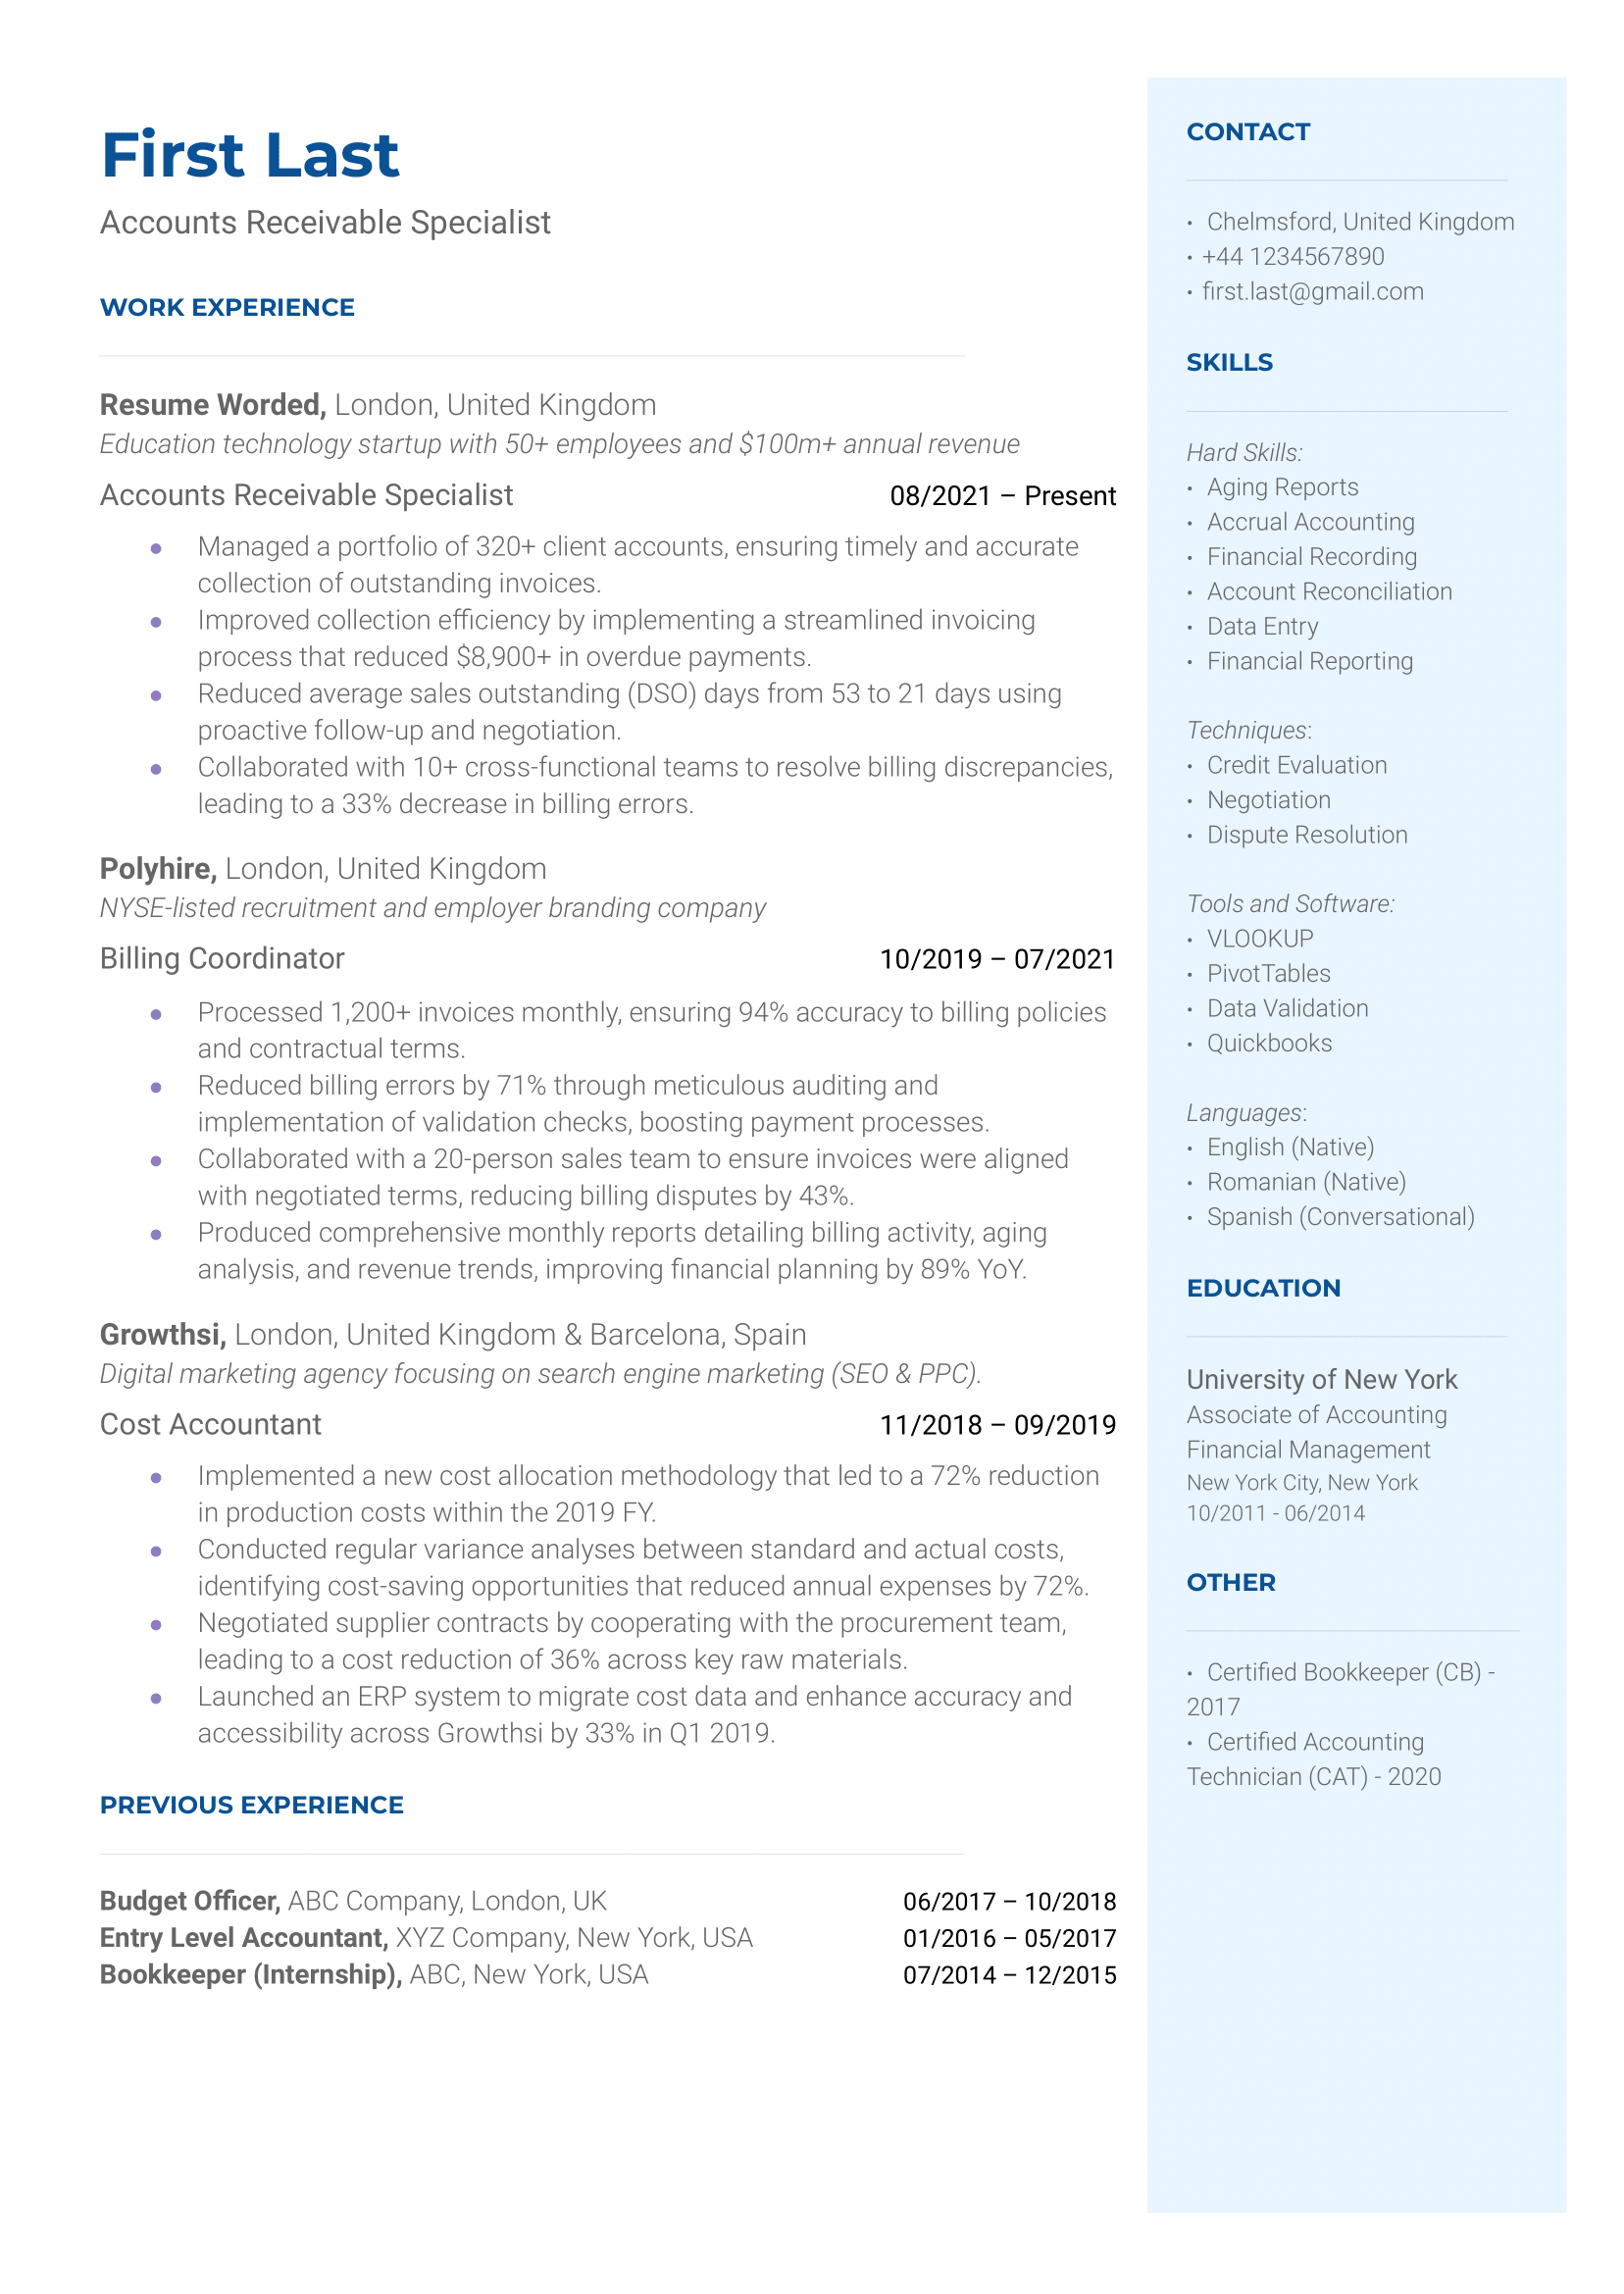 Accounts receivable resume showcasing data proficiency and collection strategies.